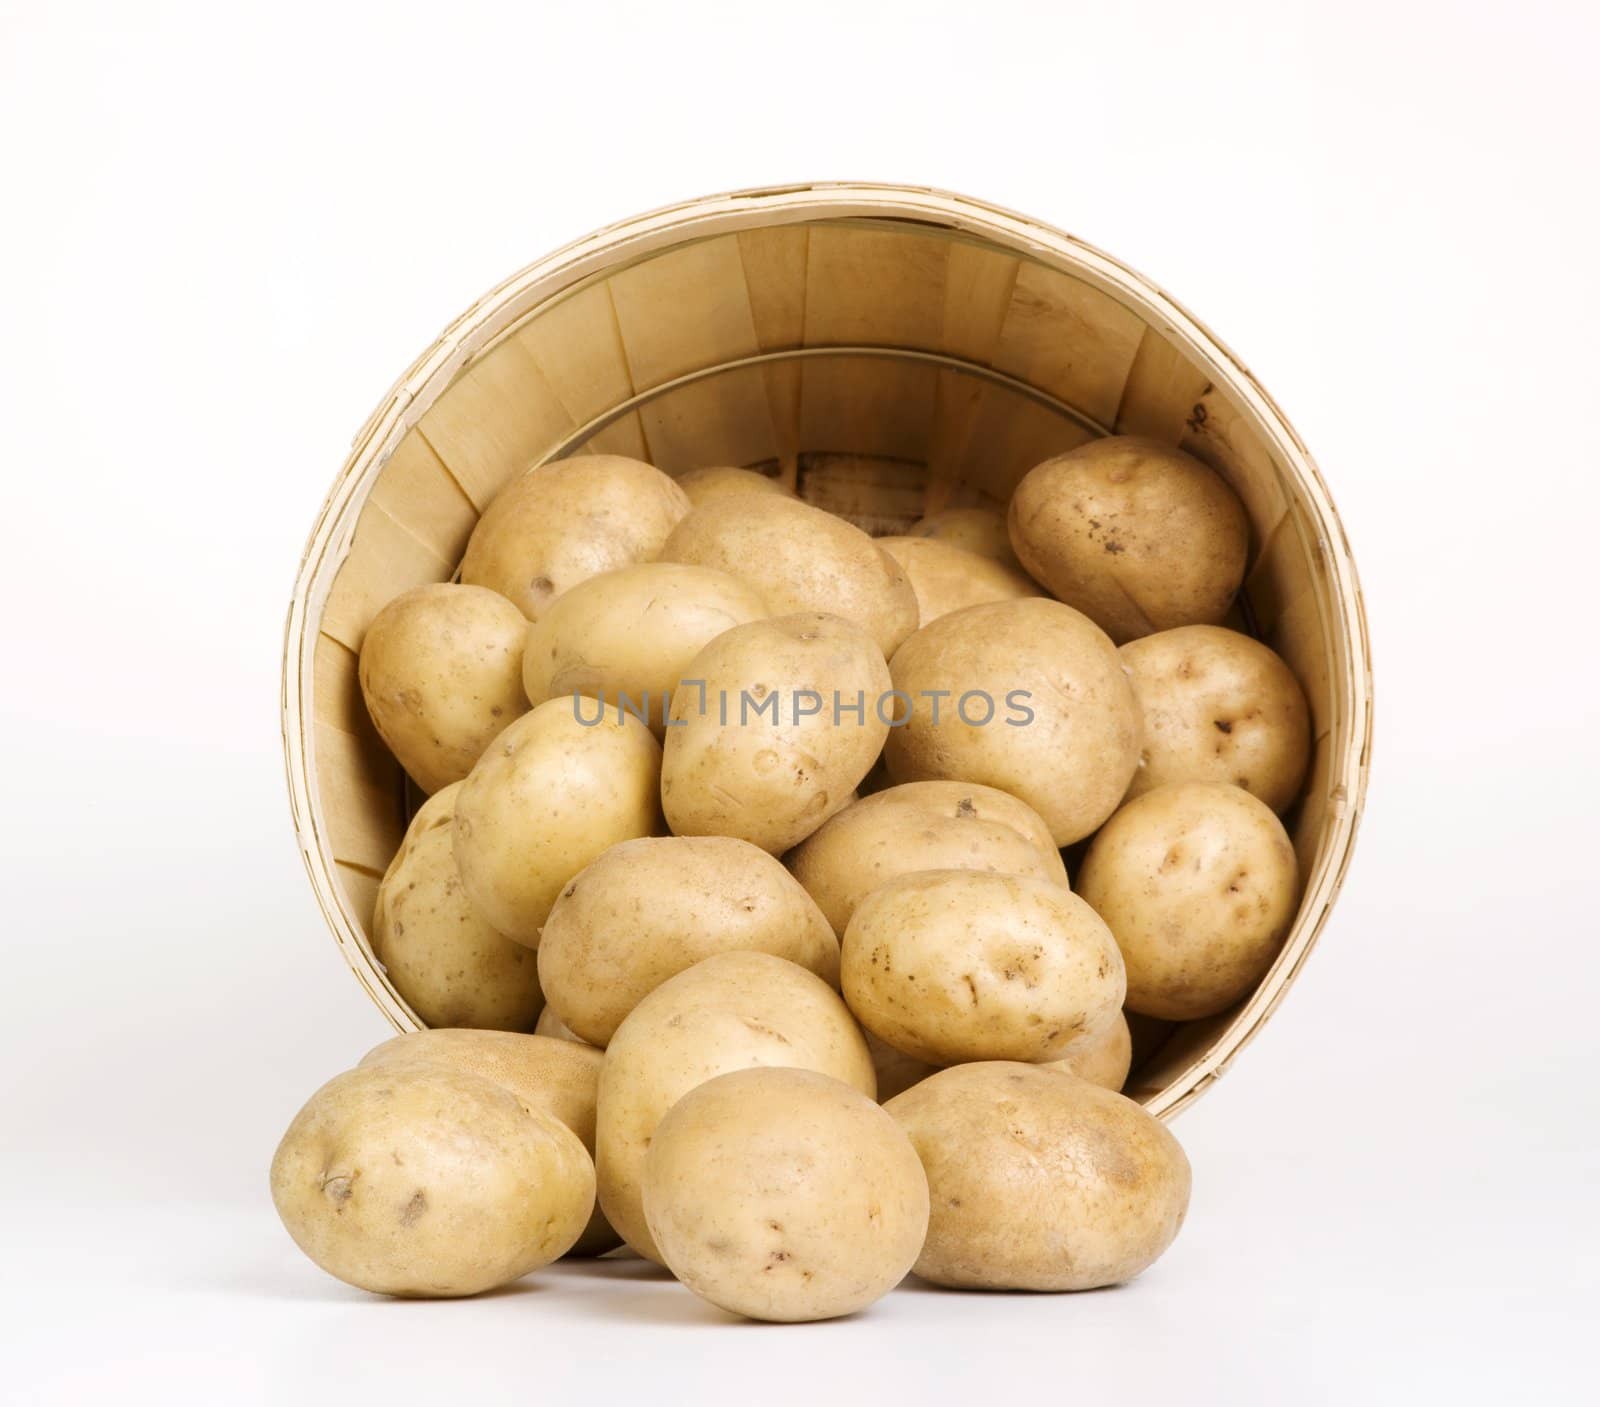 Patatoes in a woven basket on a white backround